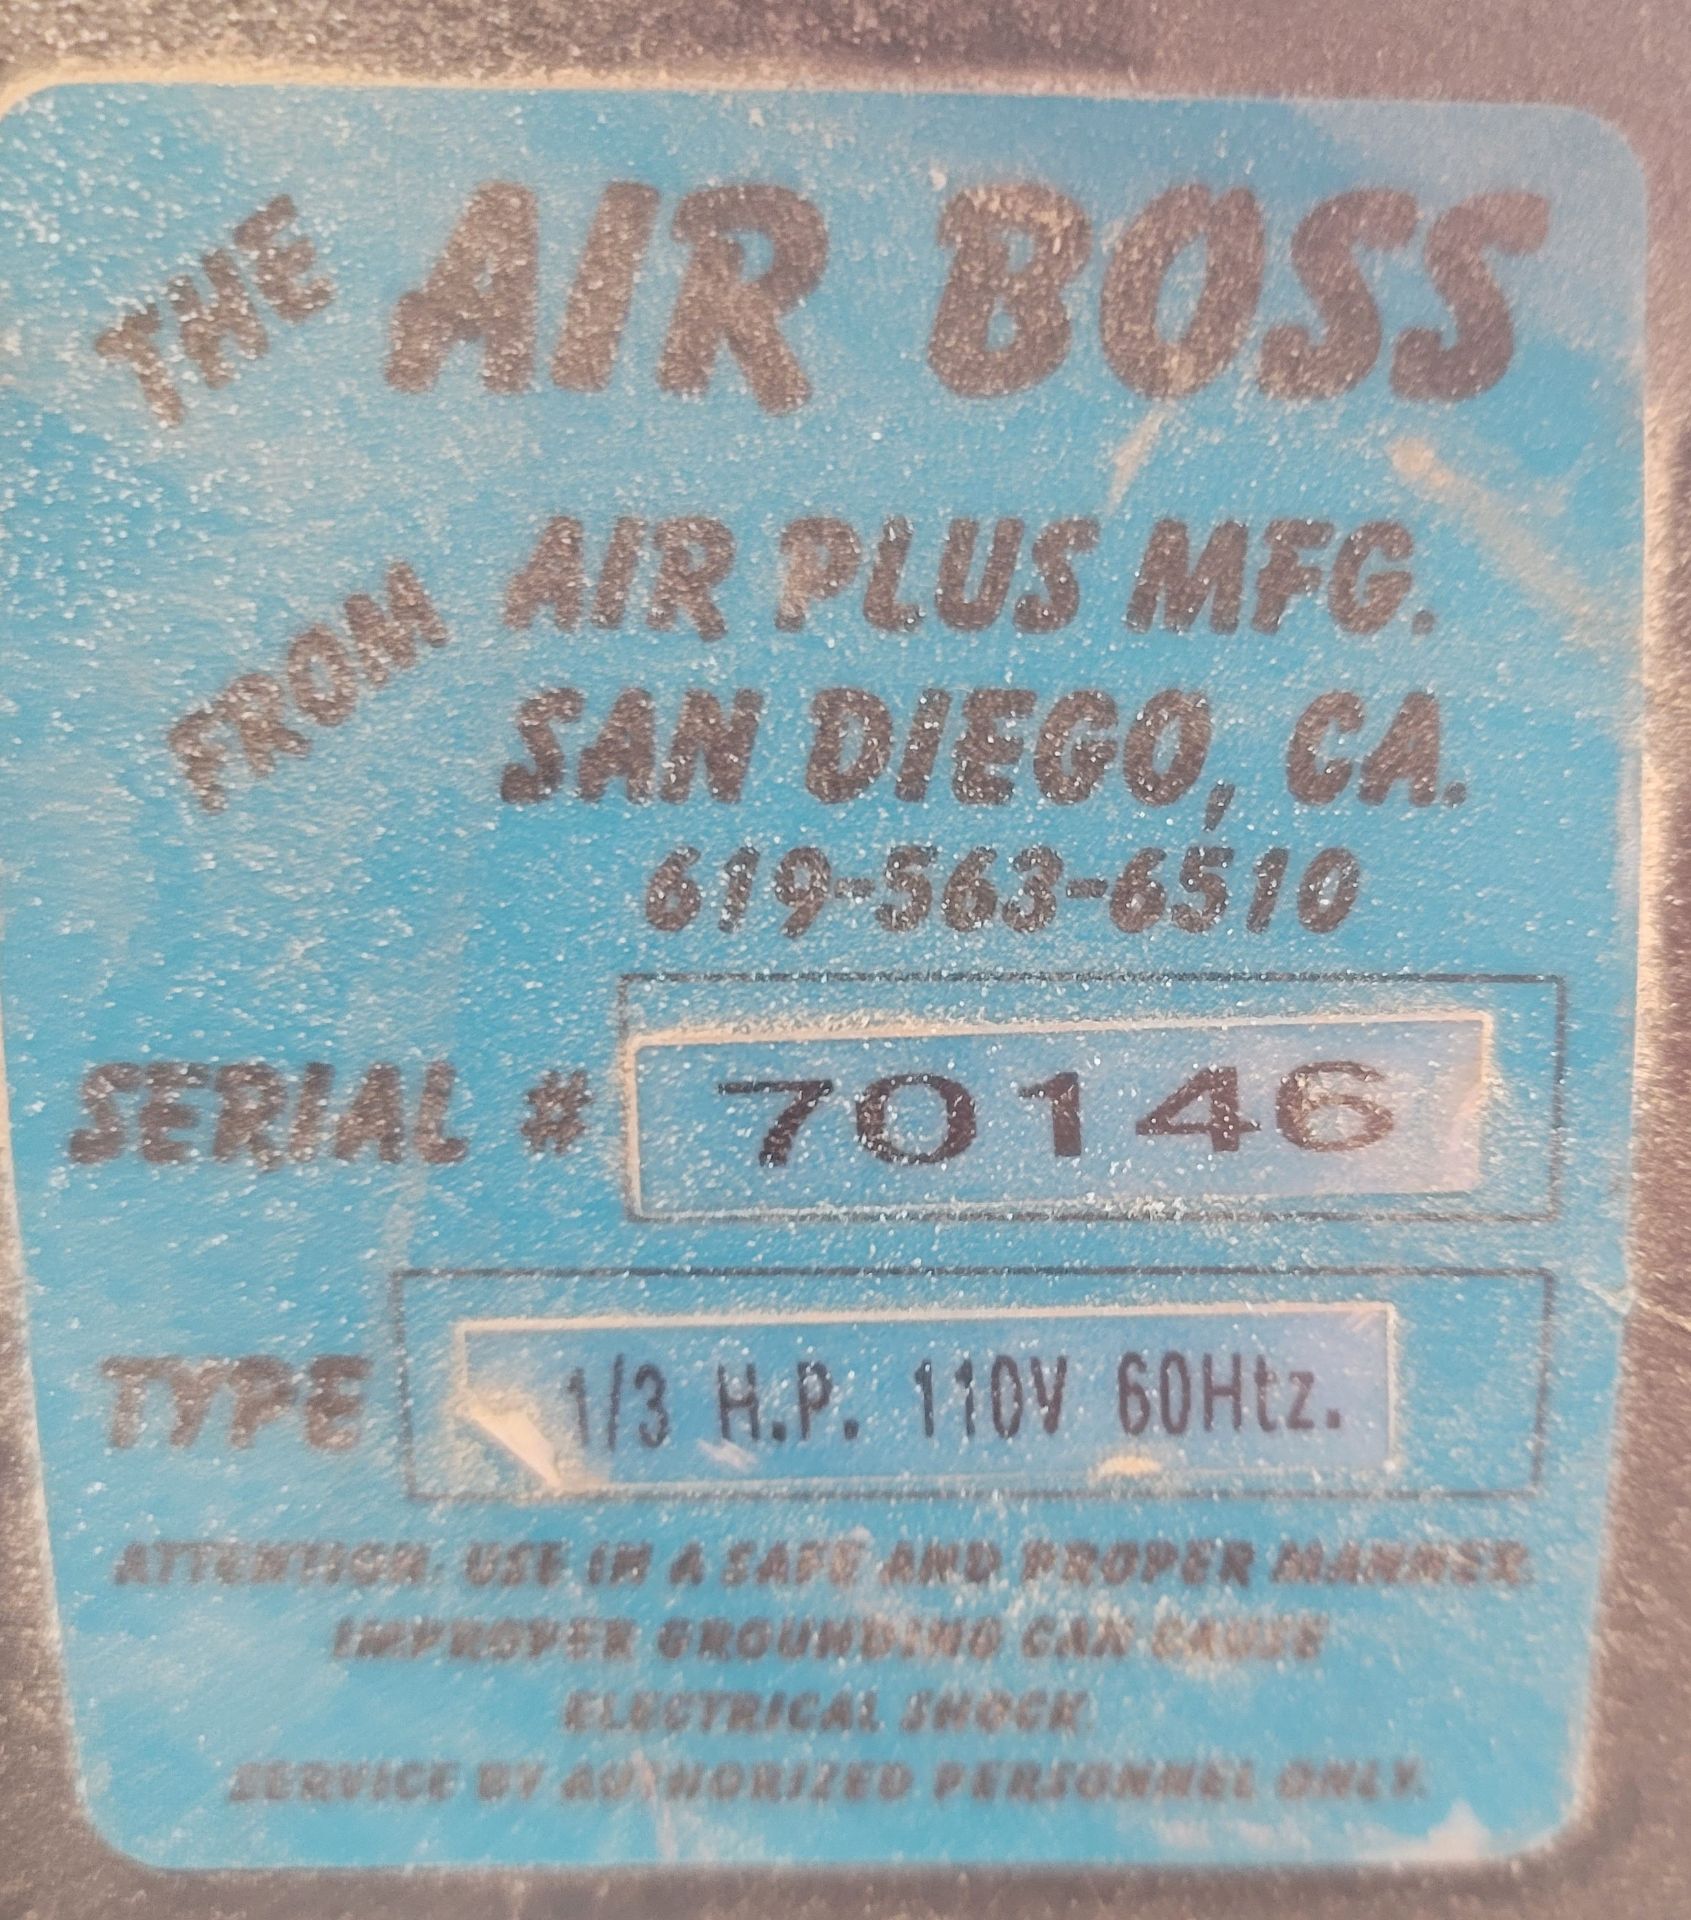 AIR BOSS 3-SPEED AIR MOVER/FLOOR DRYER, 1/3 HP (LOCATION: SAN DIEGO, CA) - Image 2 of 2